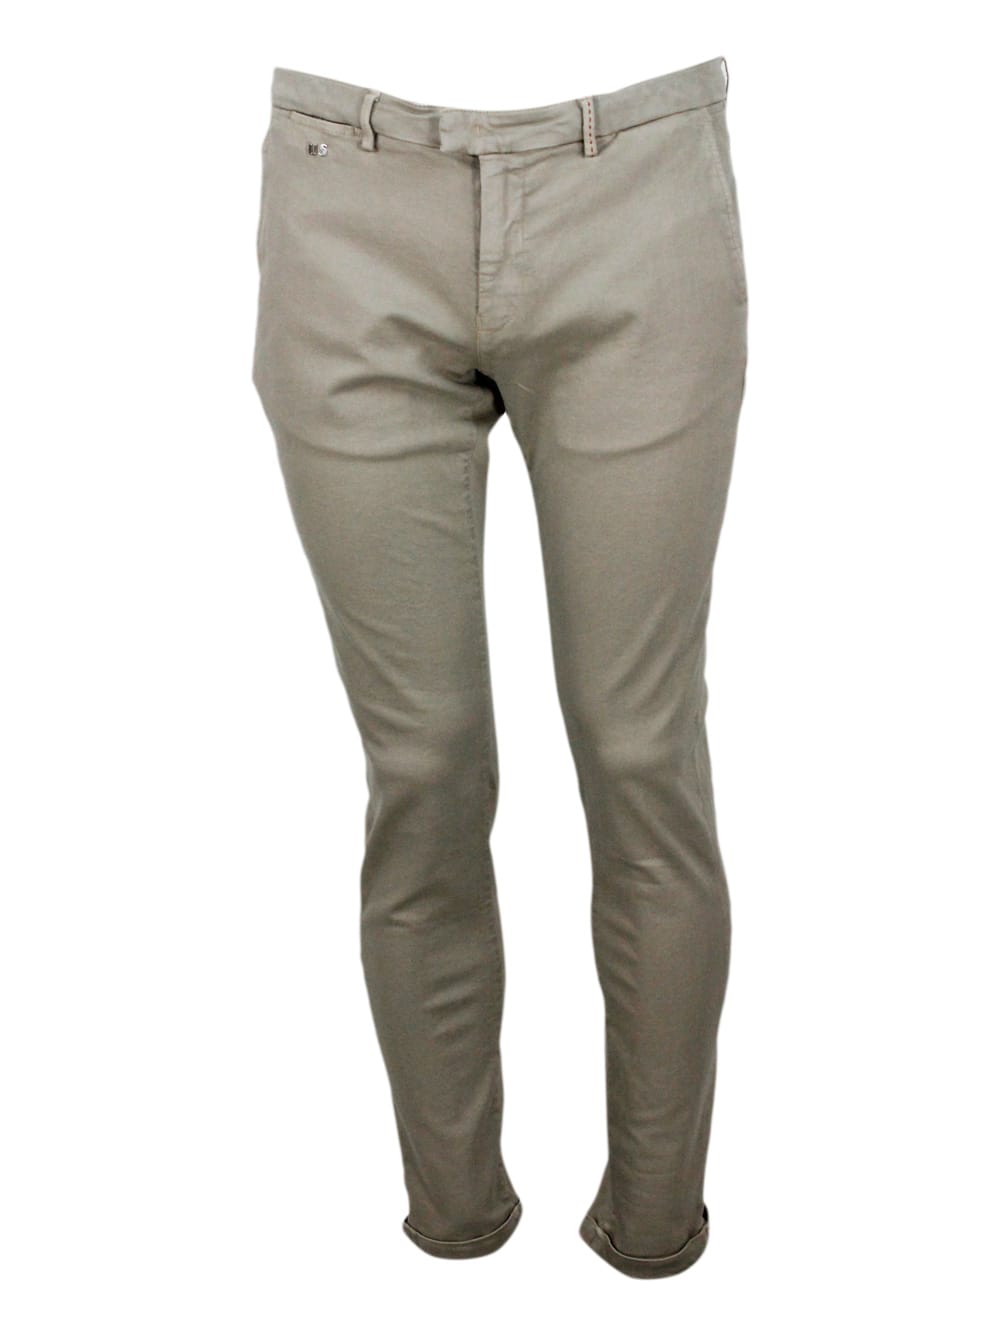 Sartoria Tramarossa Luis Trousers With Chino Pockets In Stretch Elastic Cotton With Tone-on-tone Sartorial Stitching And In Sand Beige